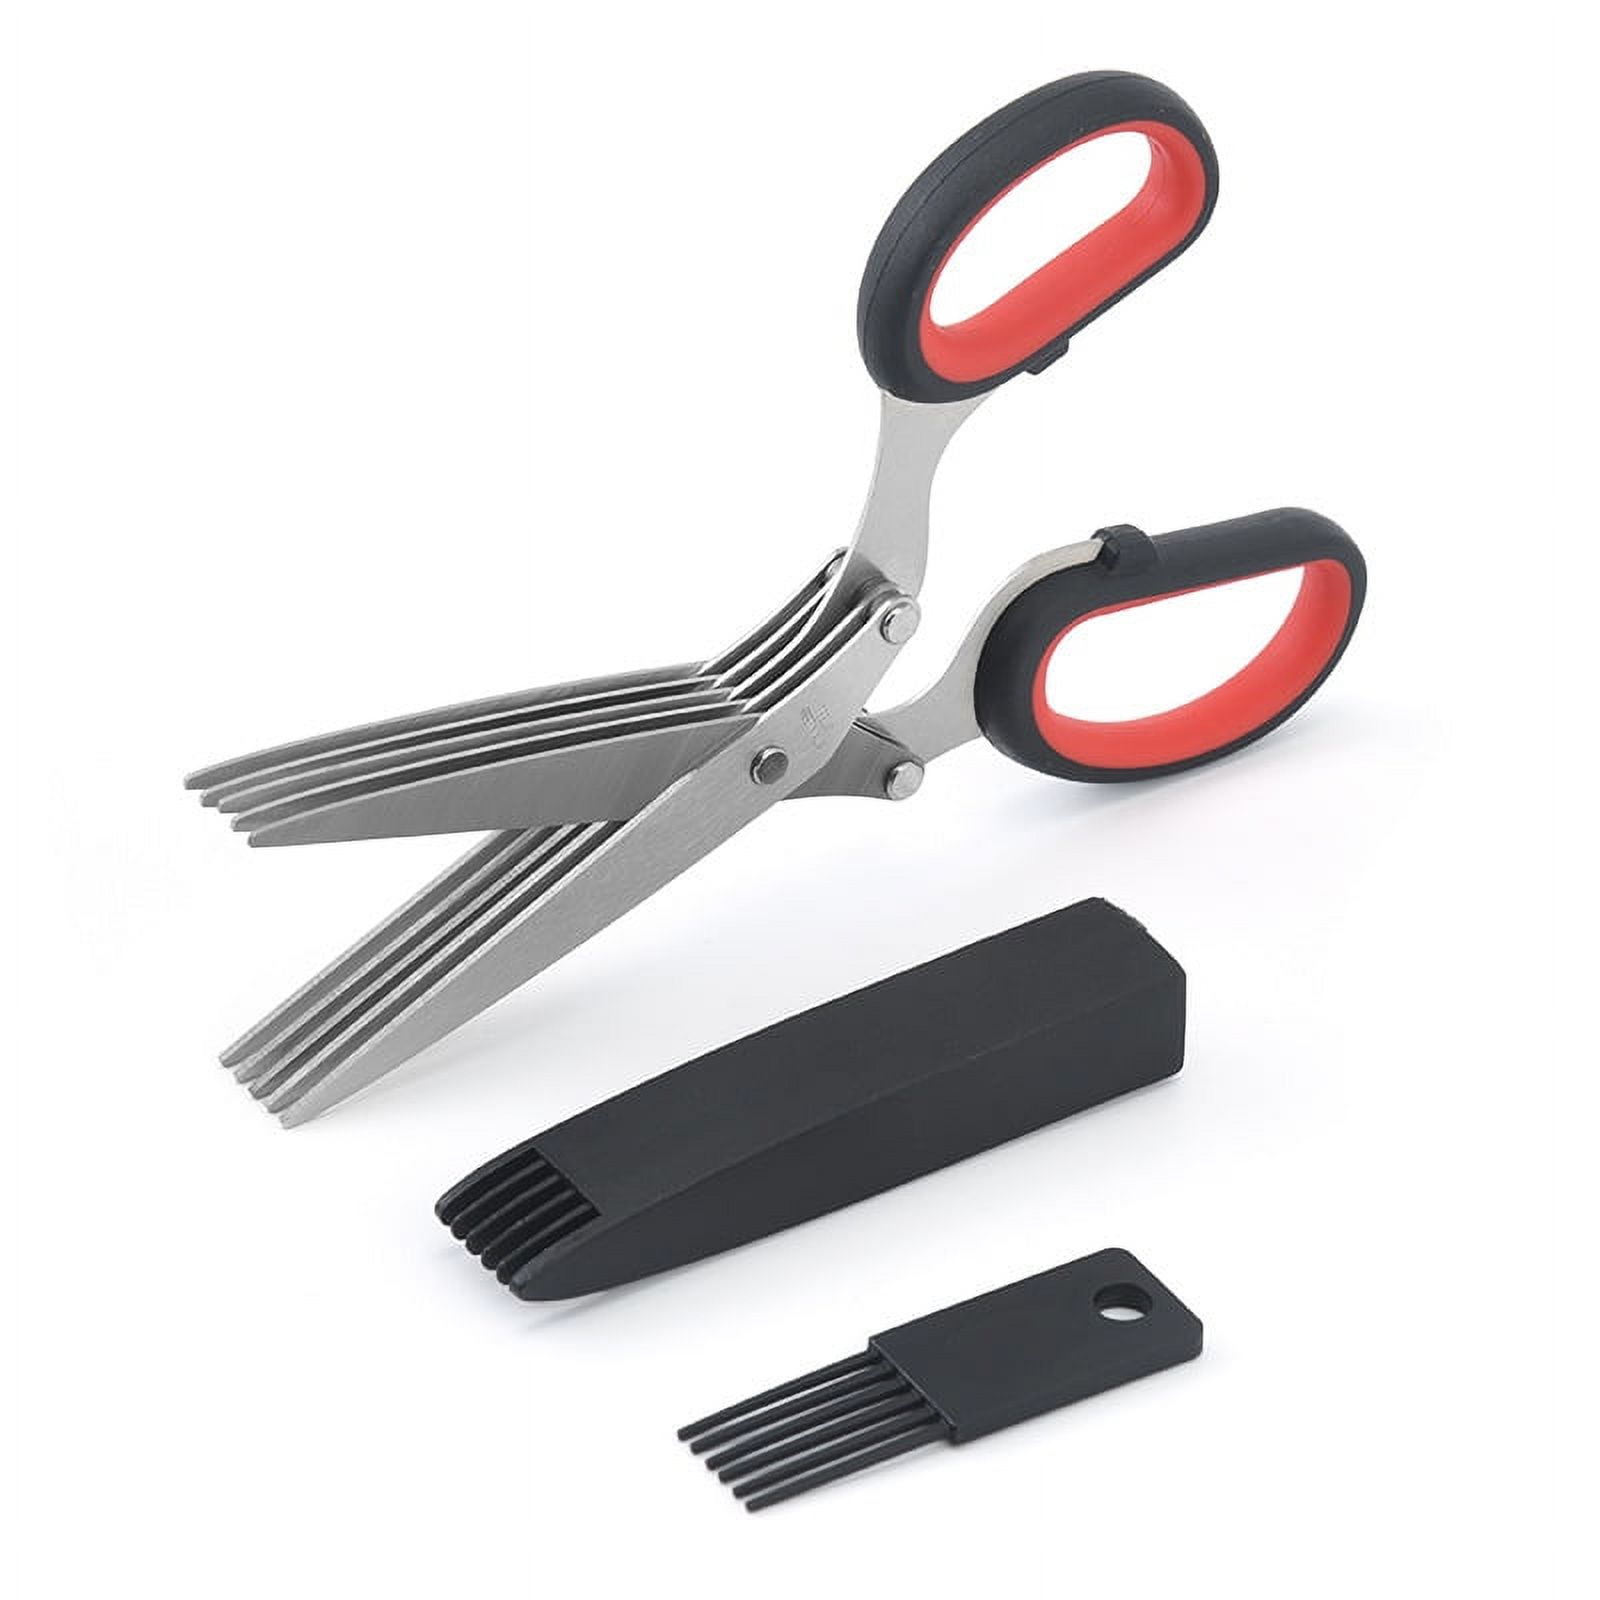 Mercer Culinary Herb Scissors with Blade Guard